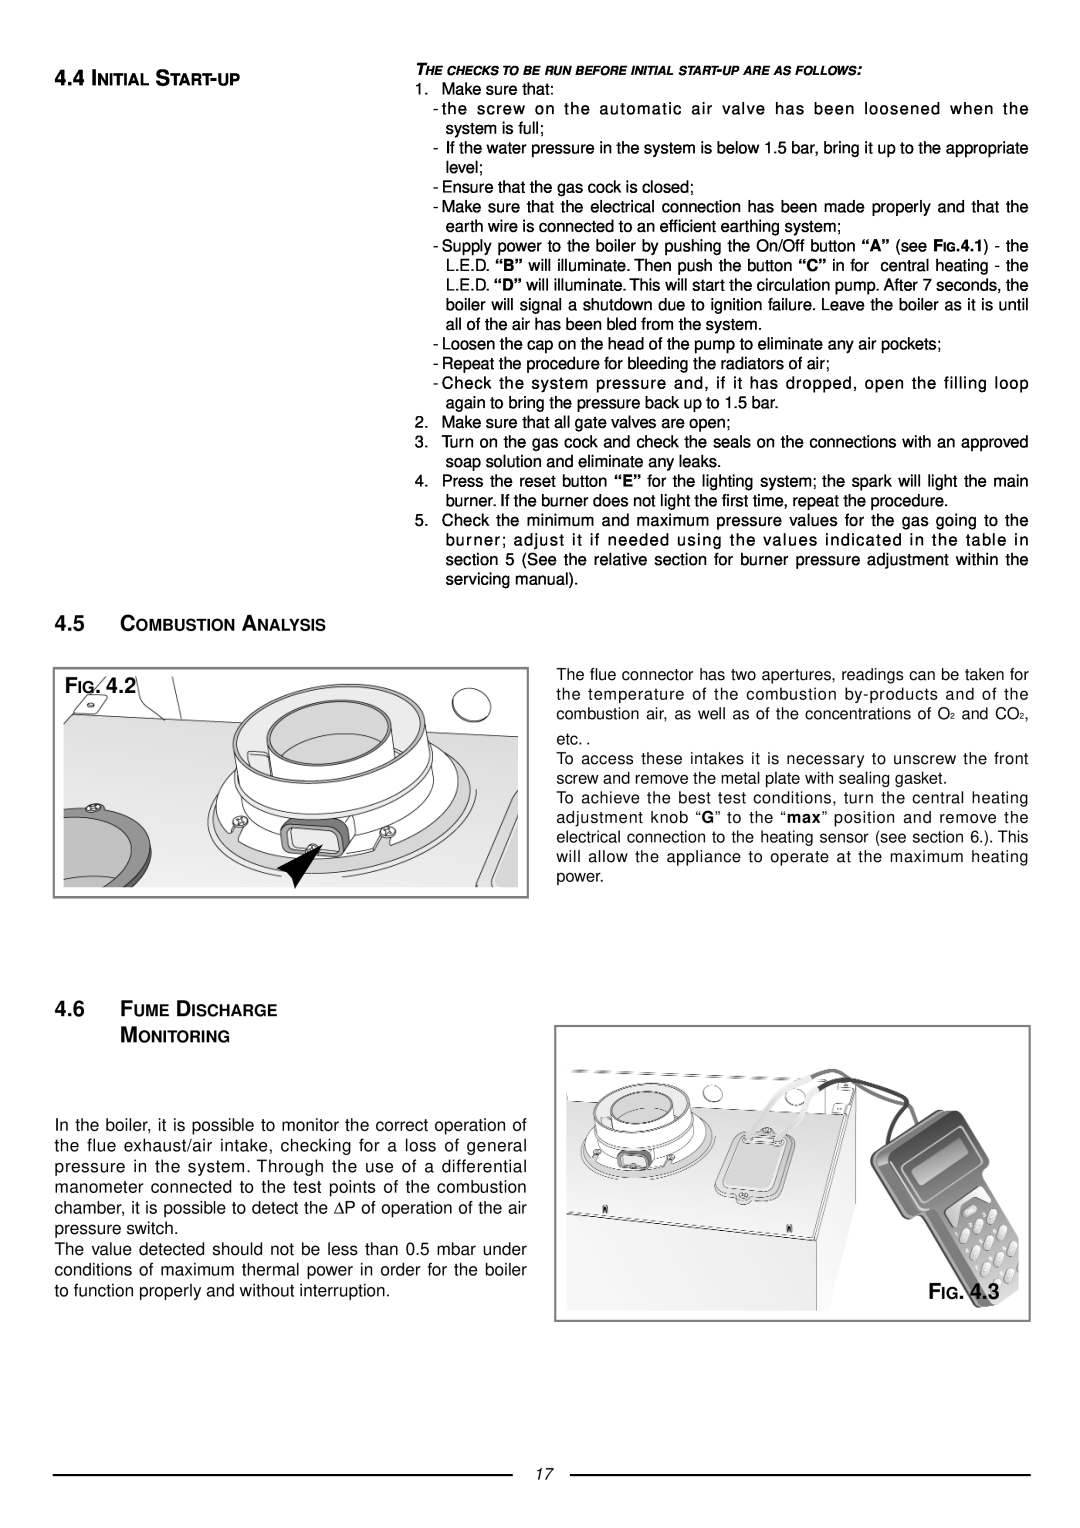 Ariston 41-116-05 installation instructions INITIAL START-UP 4.5 COMBUSTION ANALYSIS, Fume Discharge Monitoring 